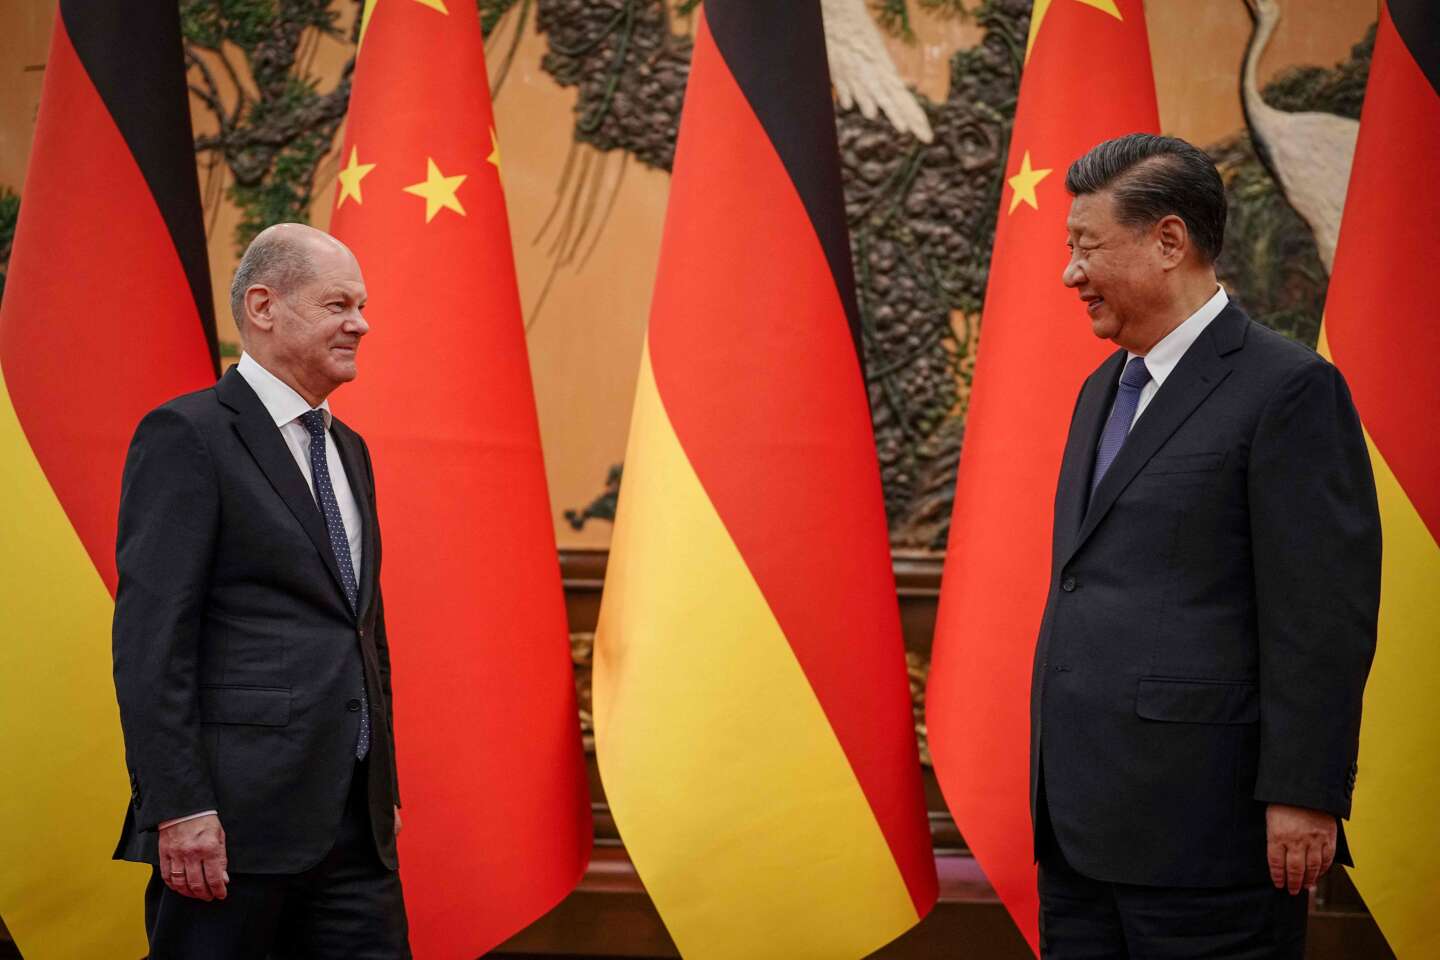 Germany continues to prefer rapprochement to confrontation with China